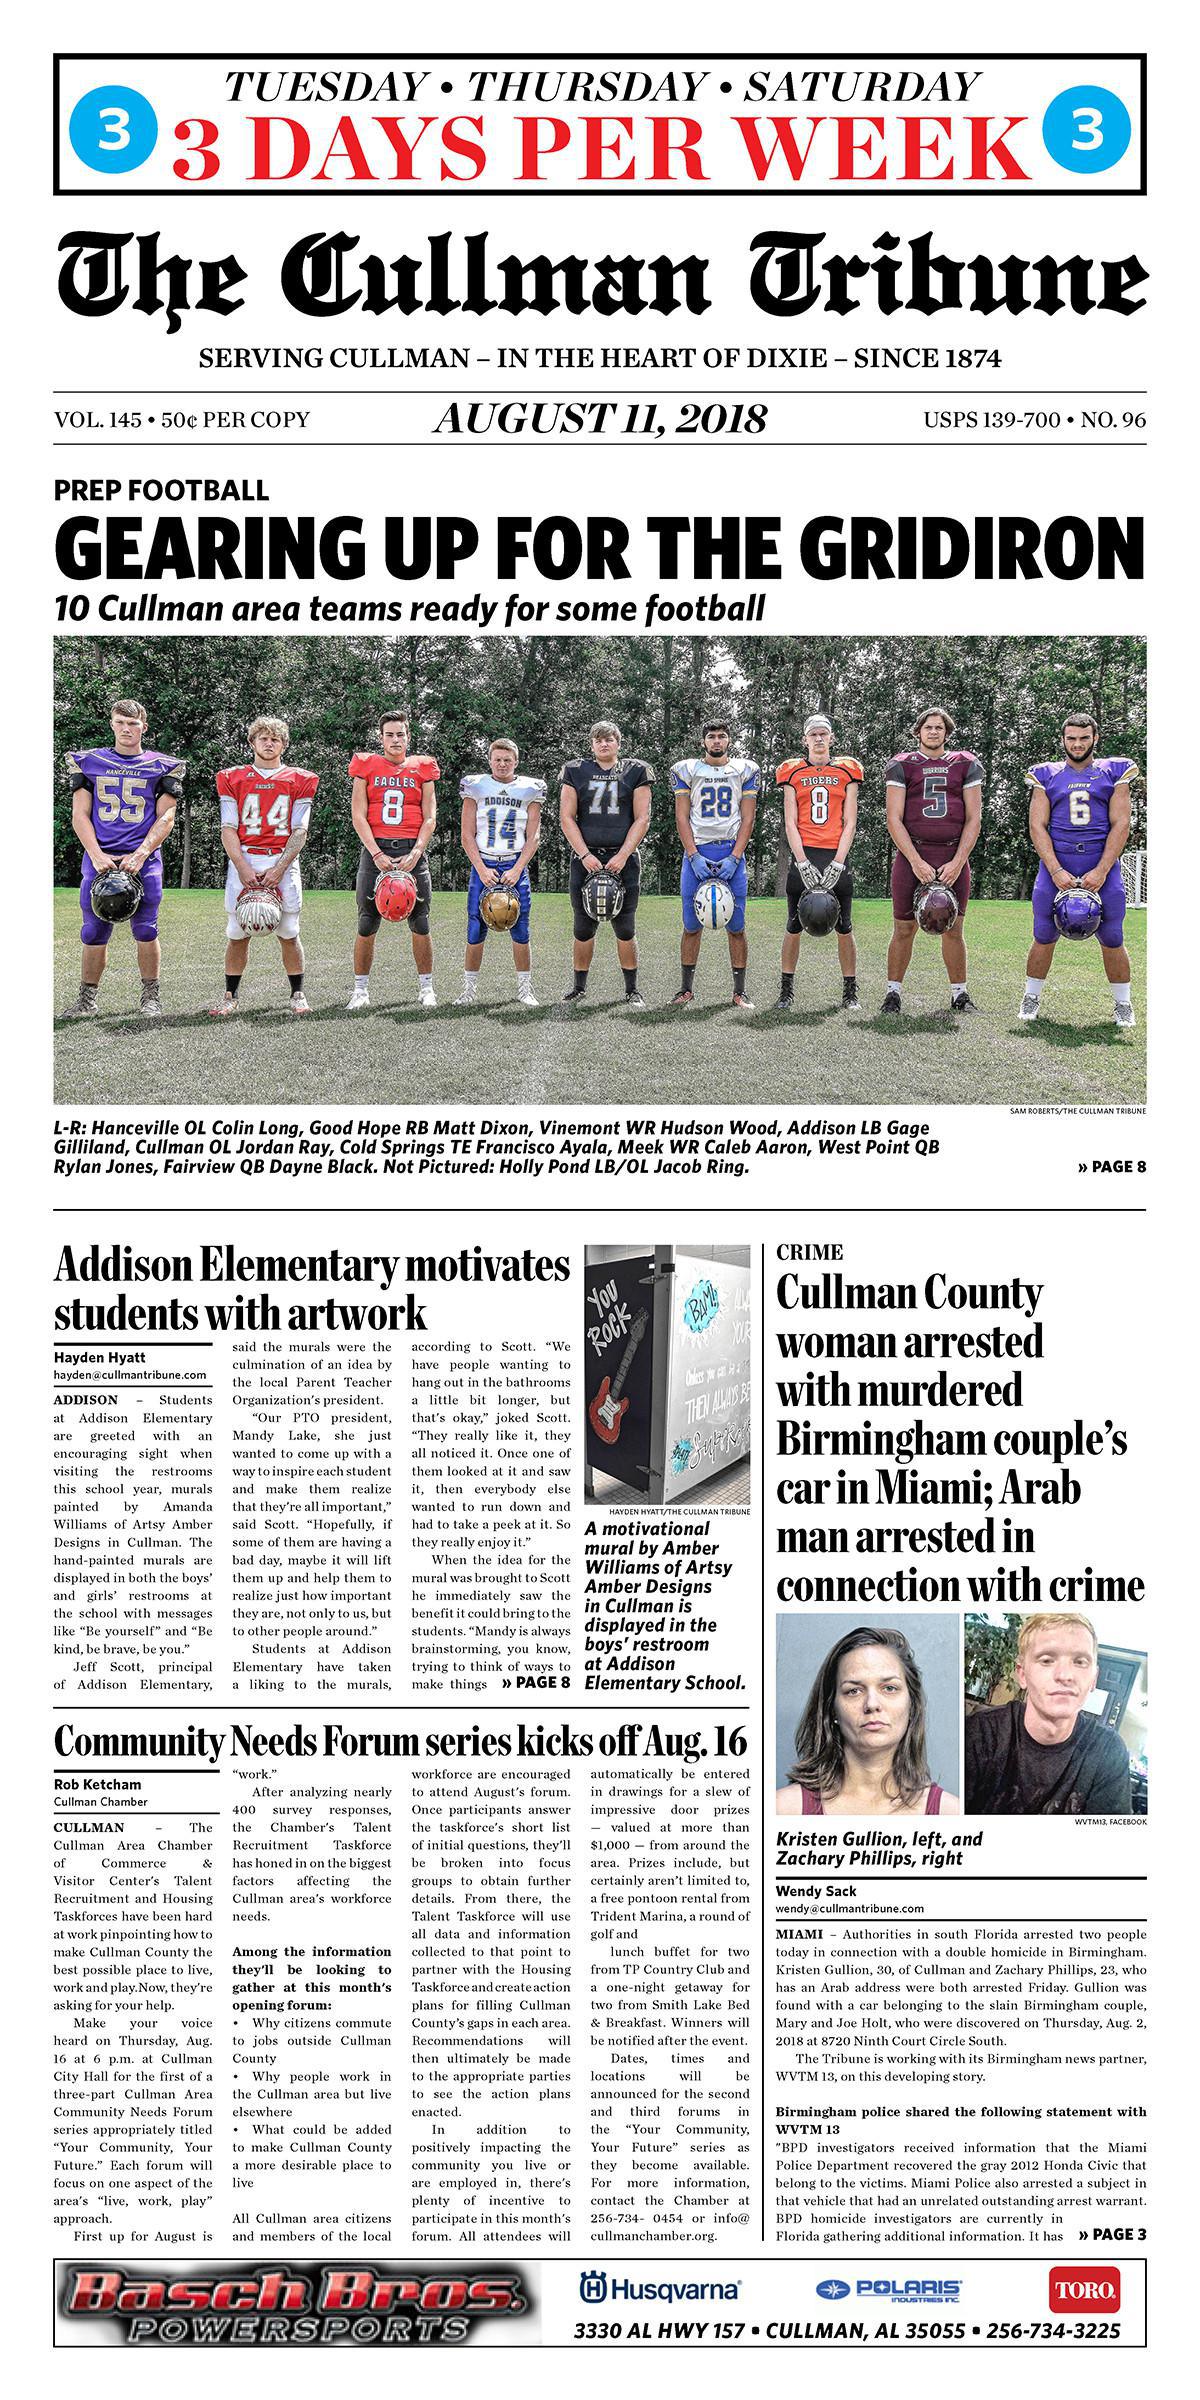 Good Morning Cullman! The 08-11-2018 edition of the Cullman Tribune is now ready to view